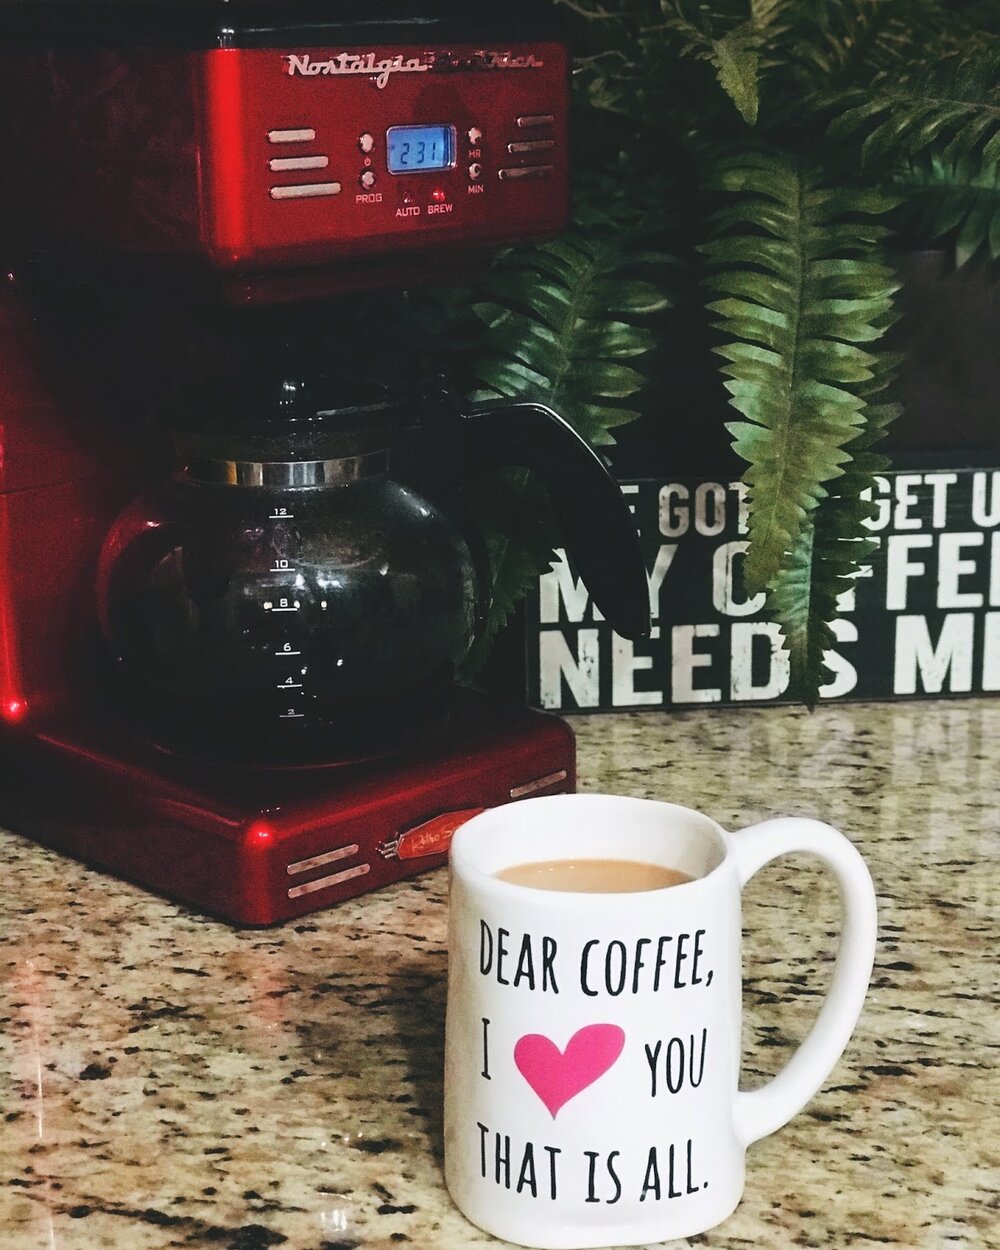 Dear Coffee, I Love You. That Is All.